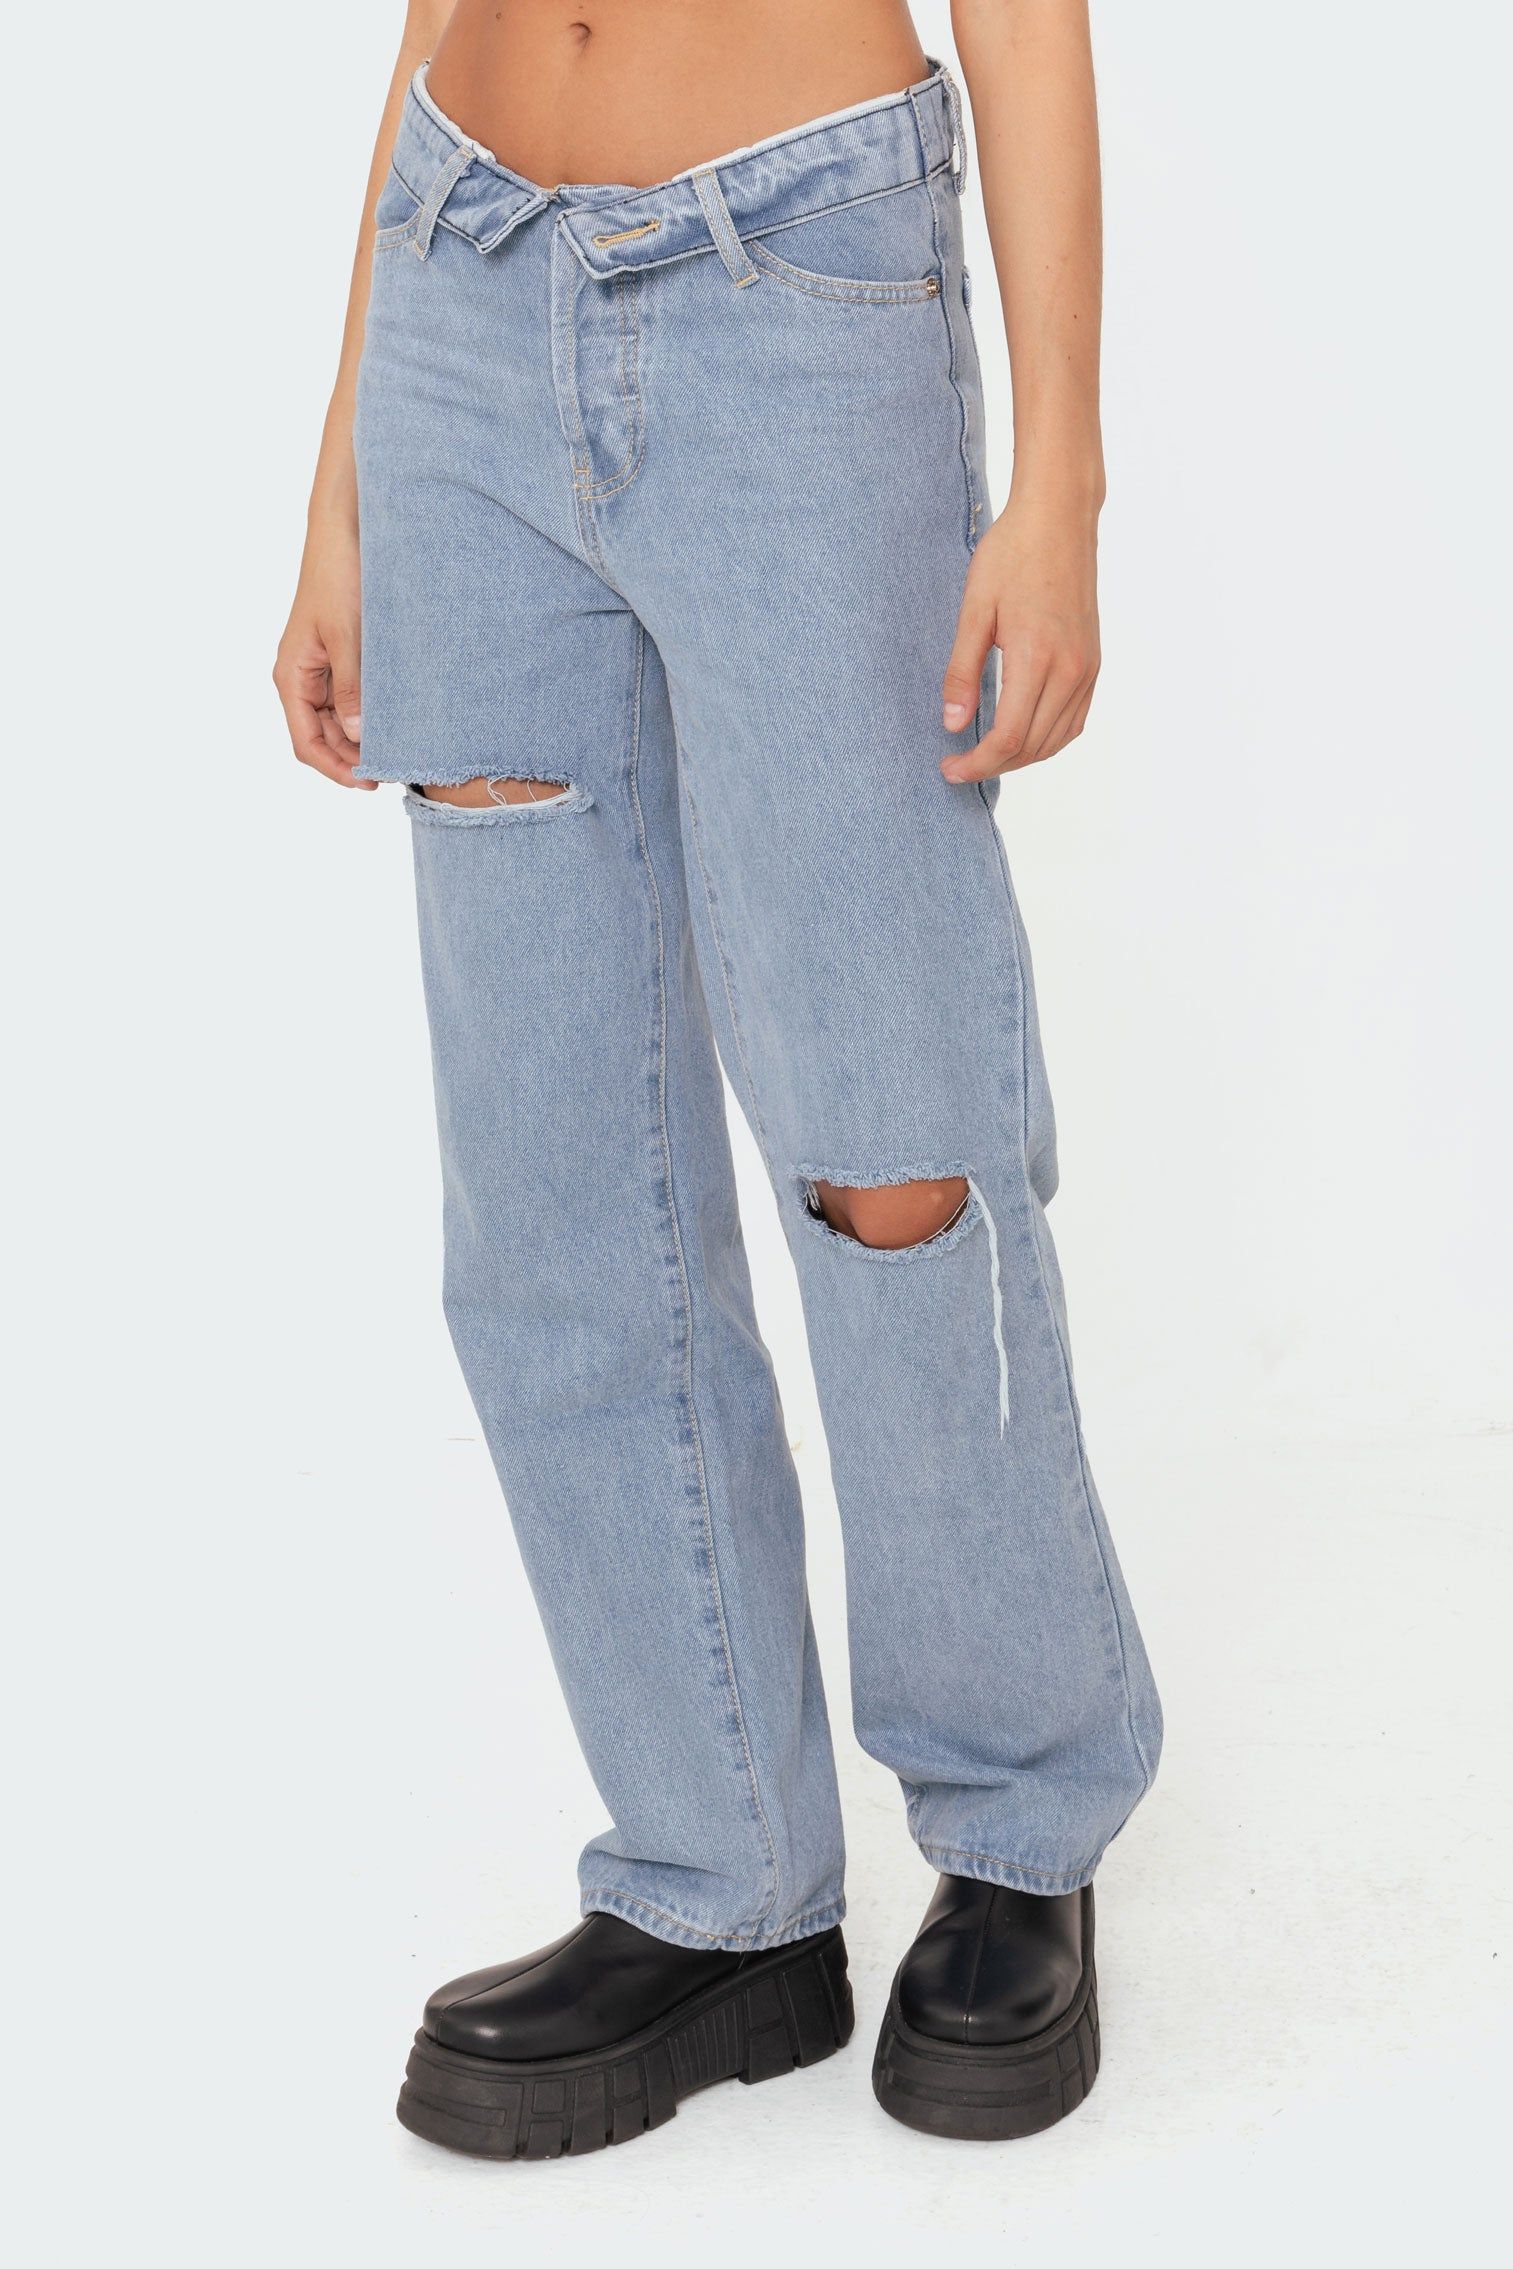 Raquel pleated jeans